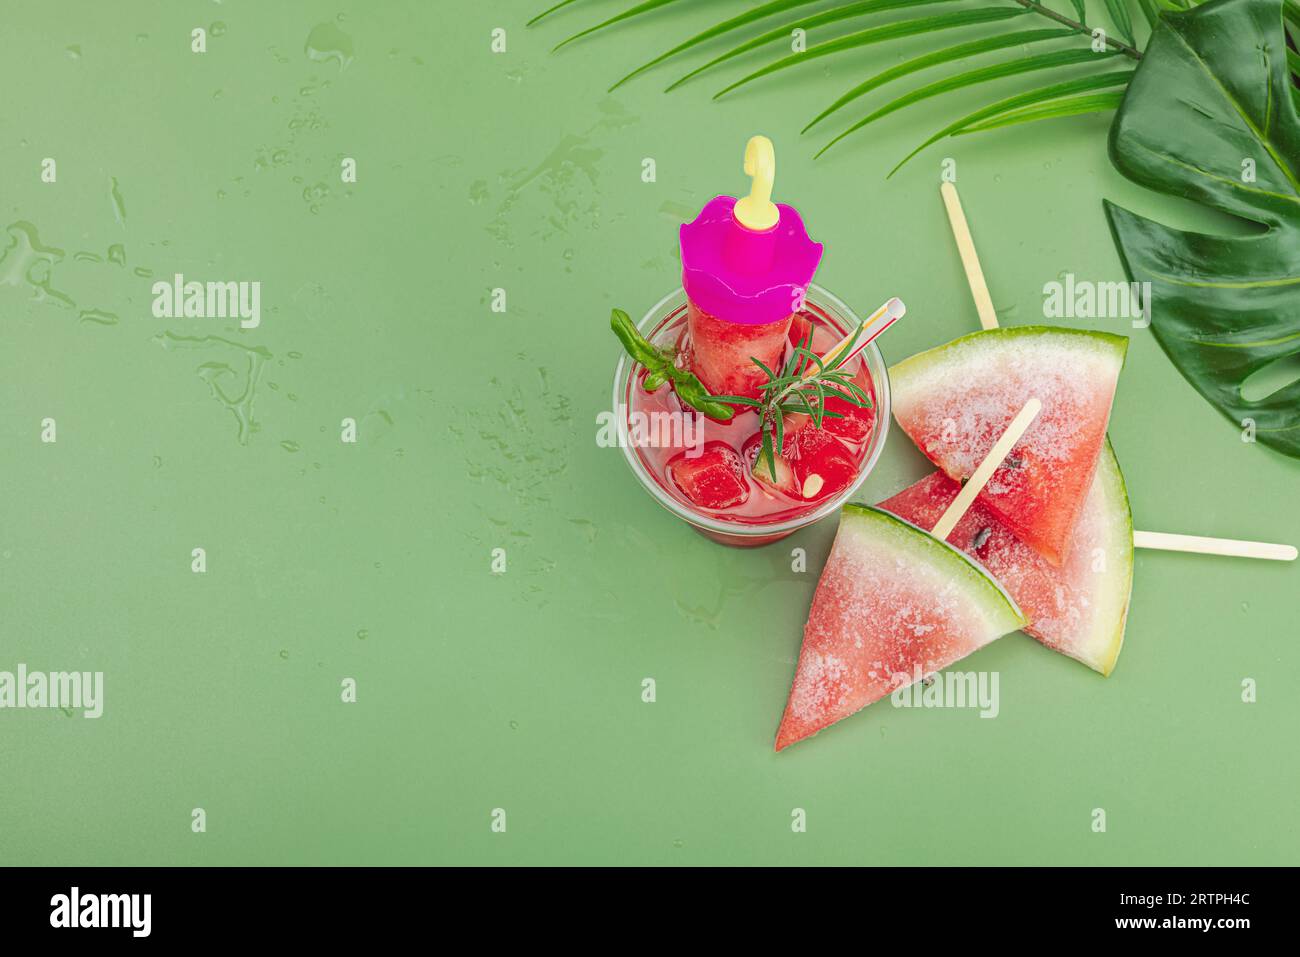 Refreshing watermelon cocktail. Traditional summer drink. Trendy Savannah green background, palm leaves, top view Stock Photo